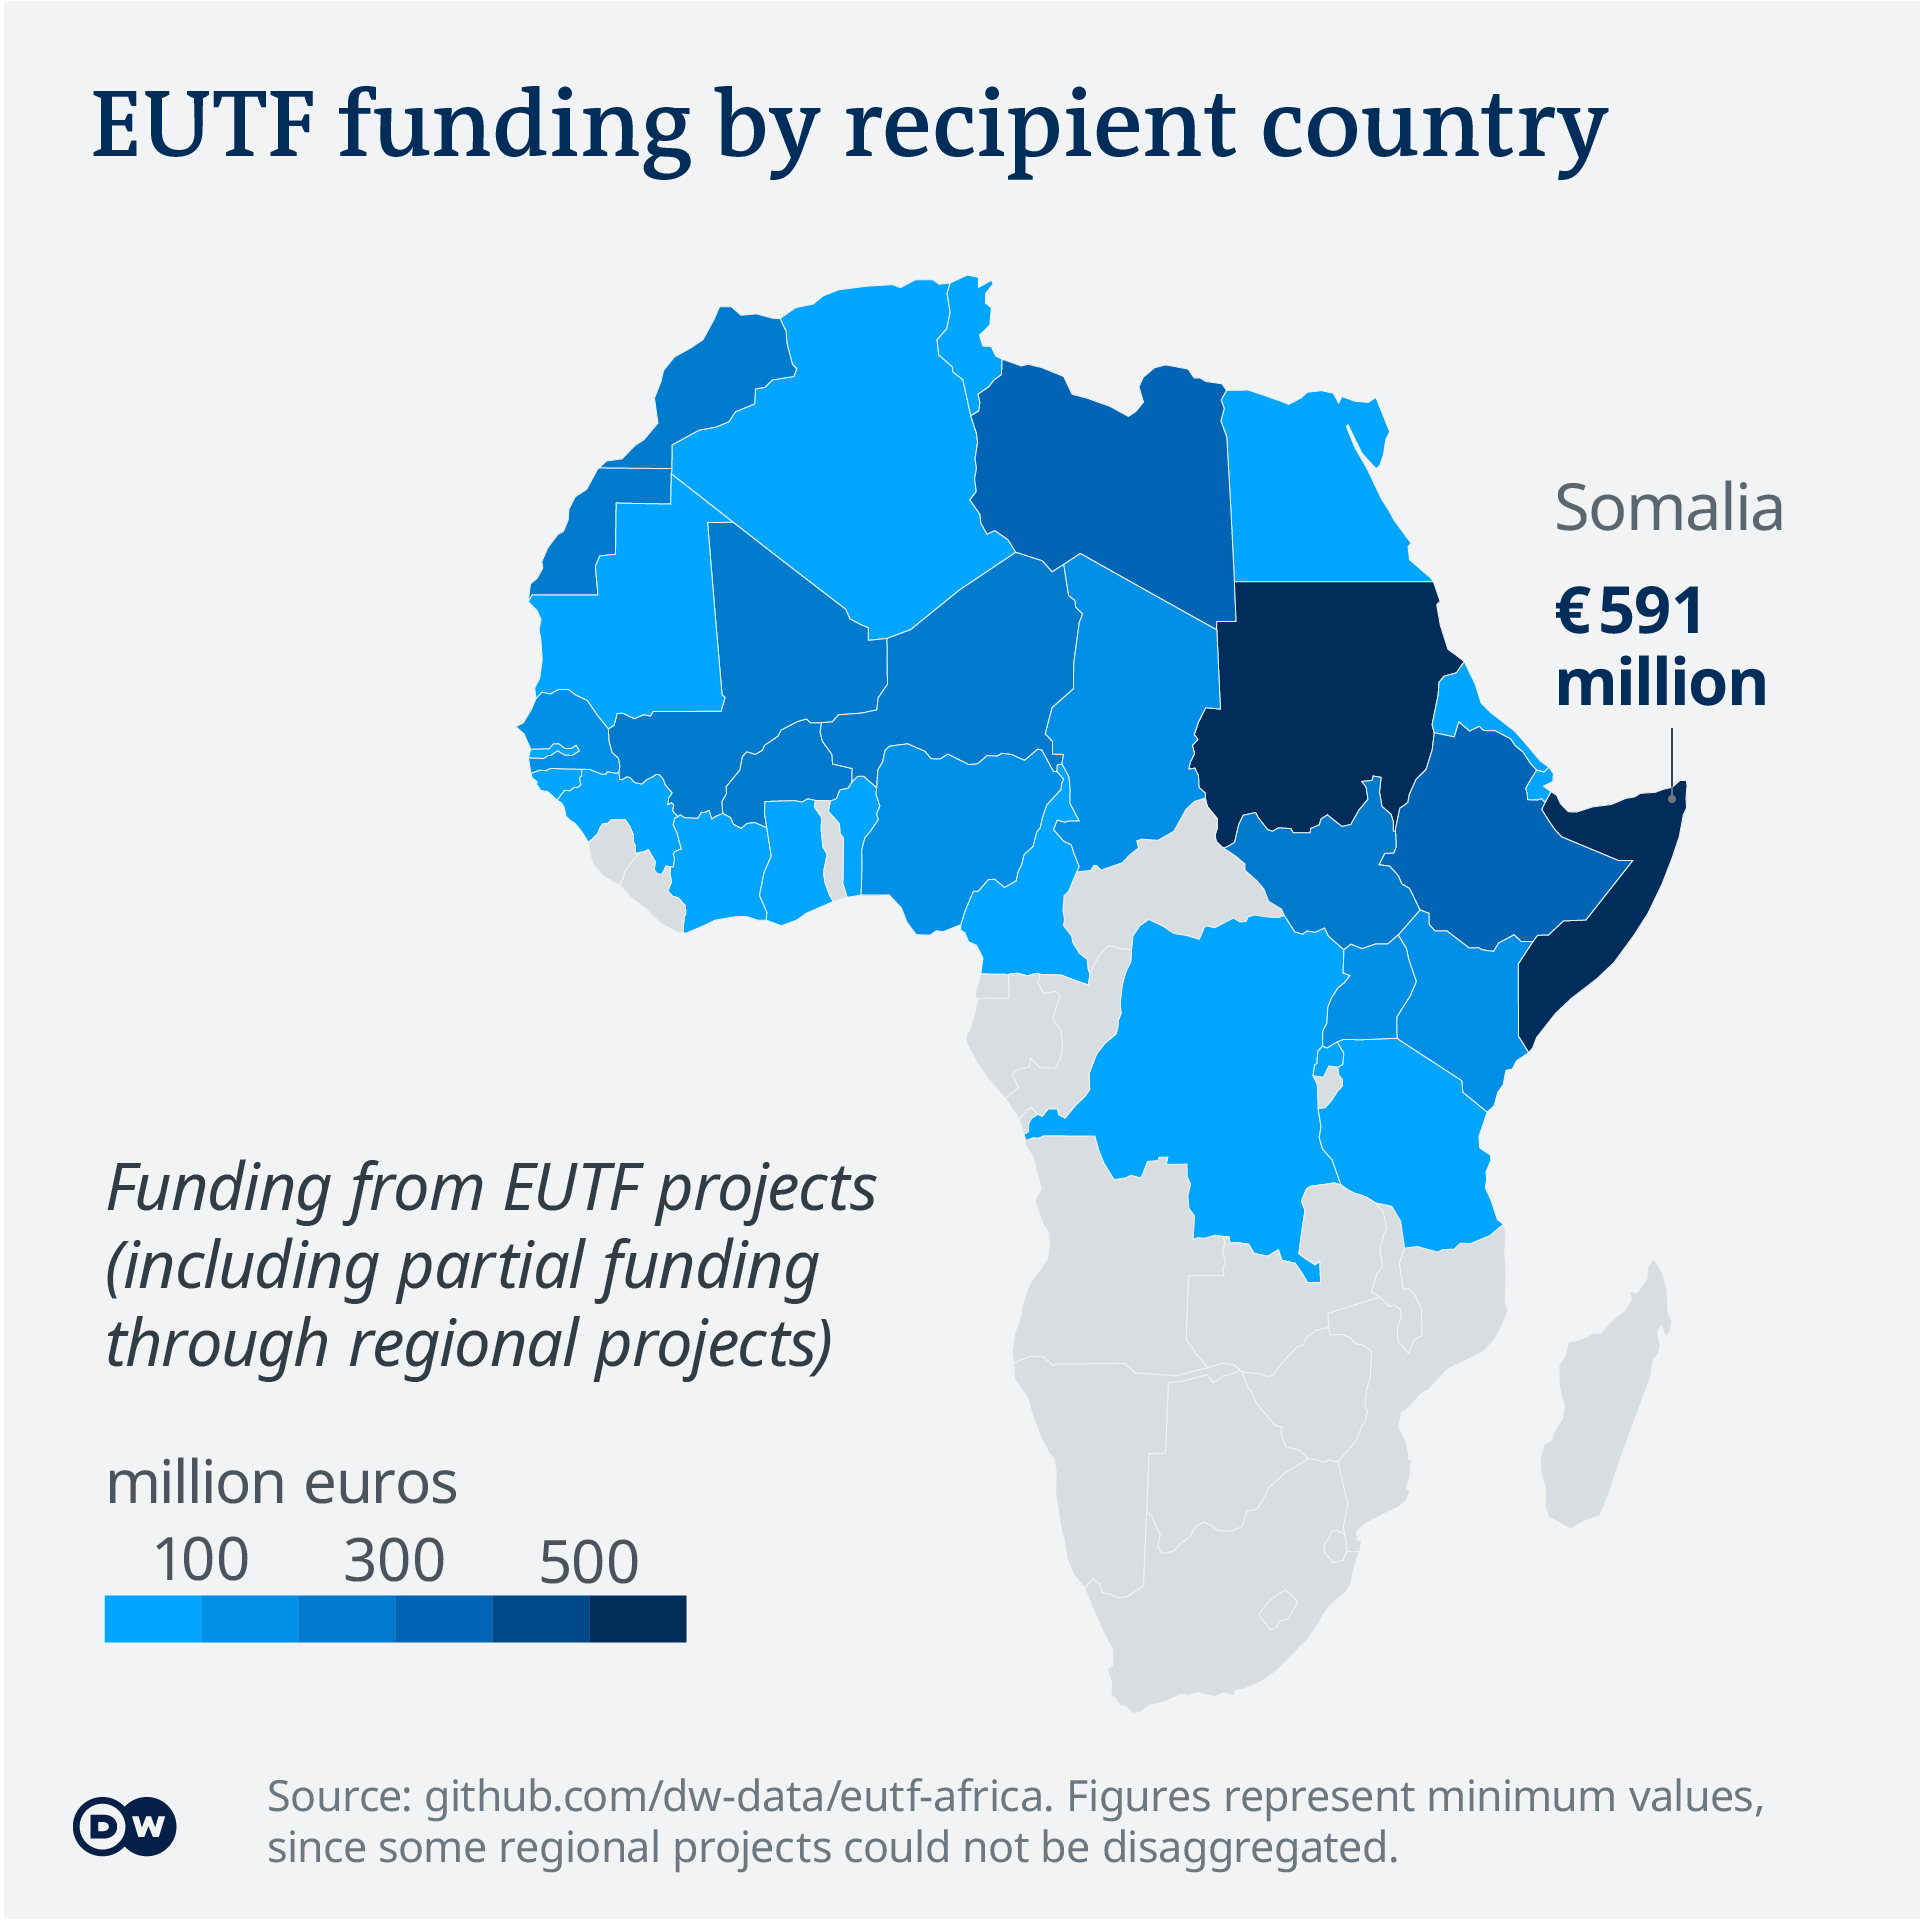 Data visualization shows distribution of EUTF funding by recipient country